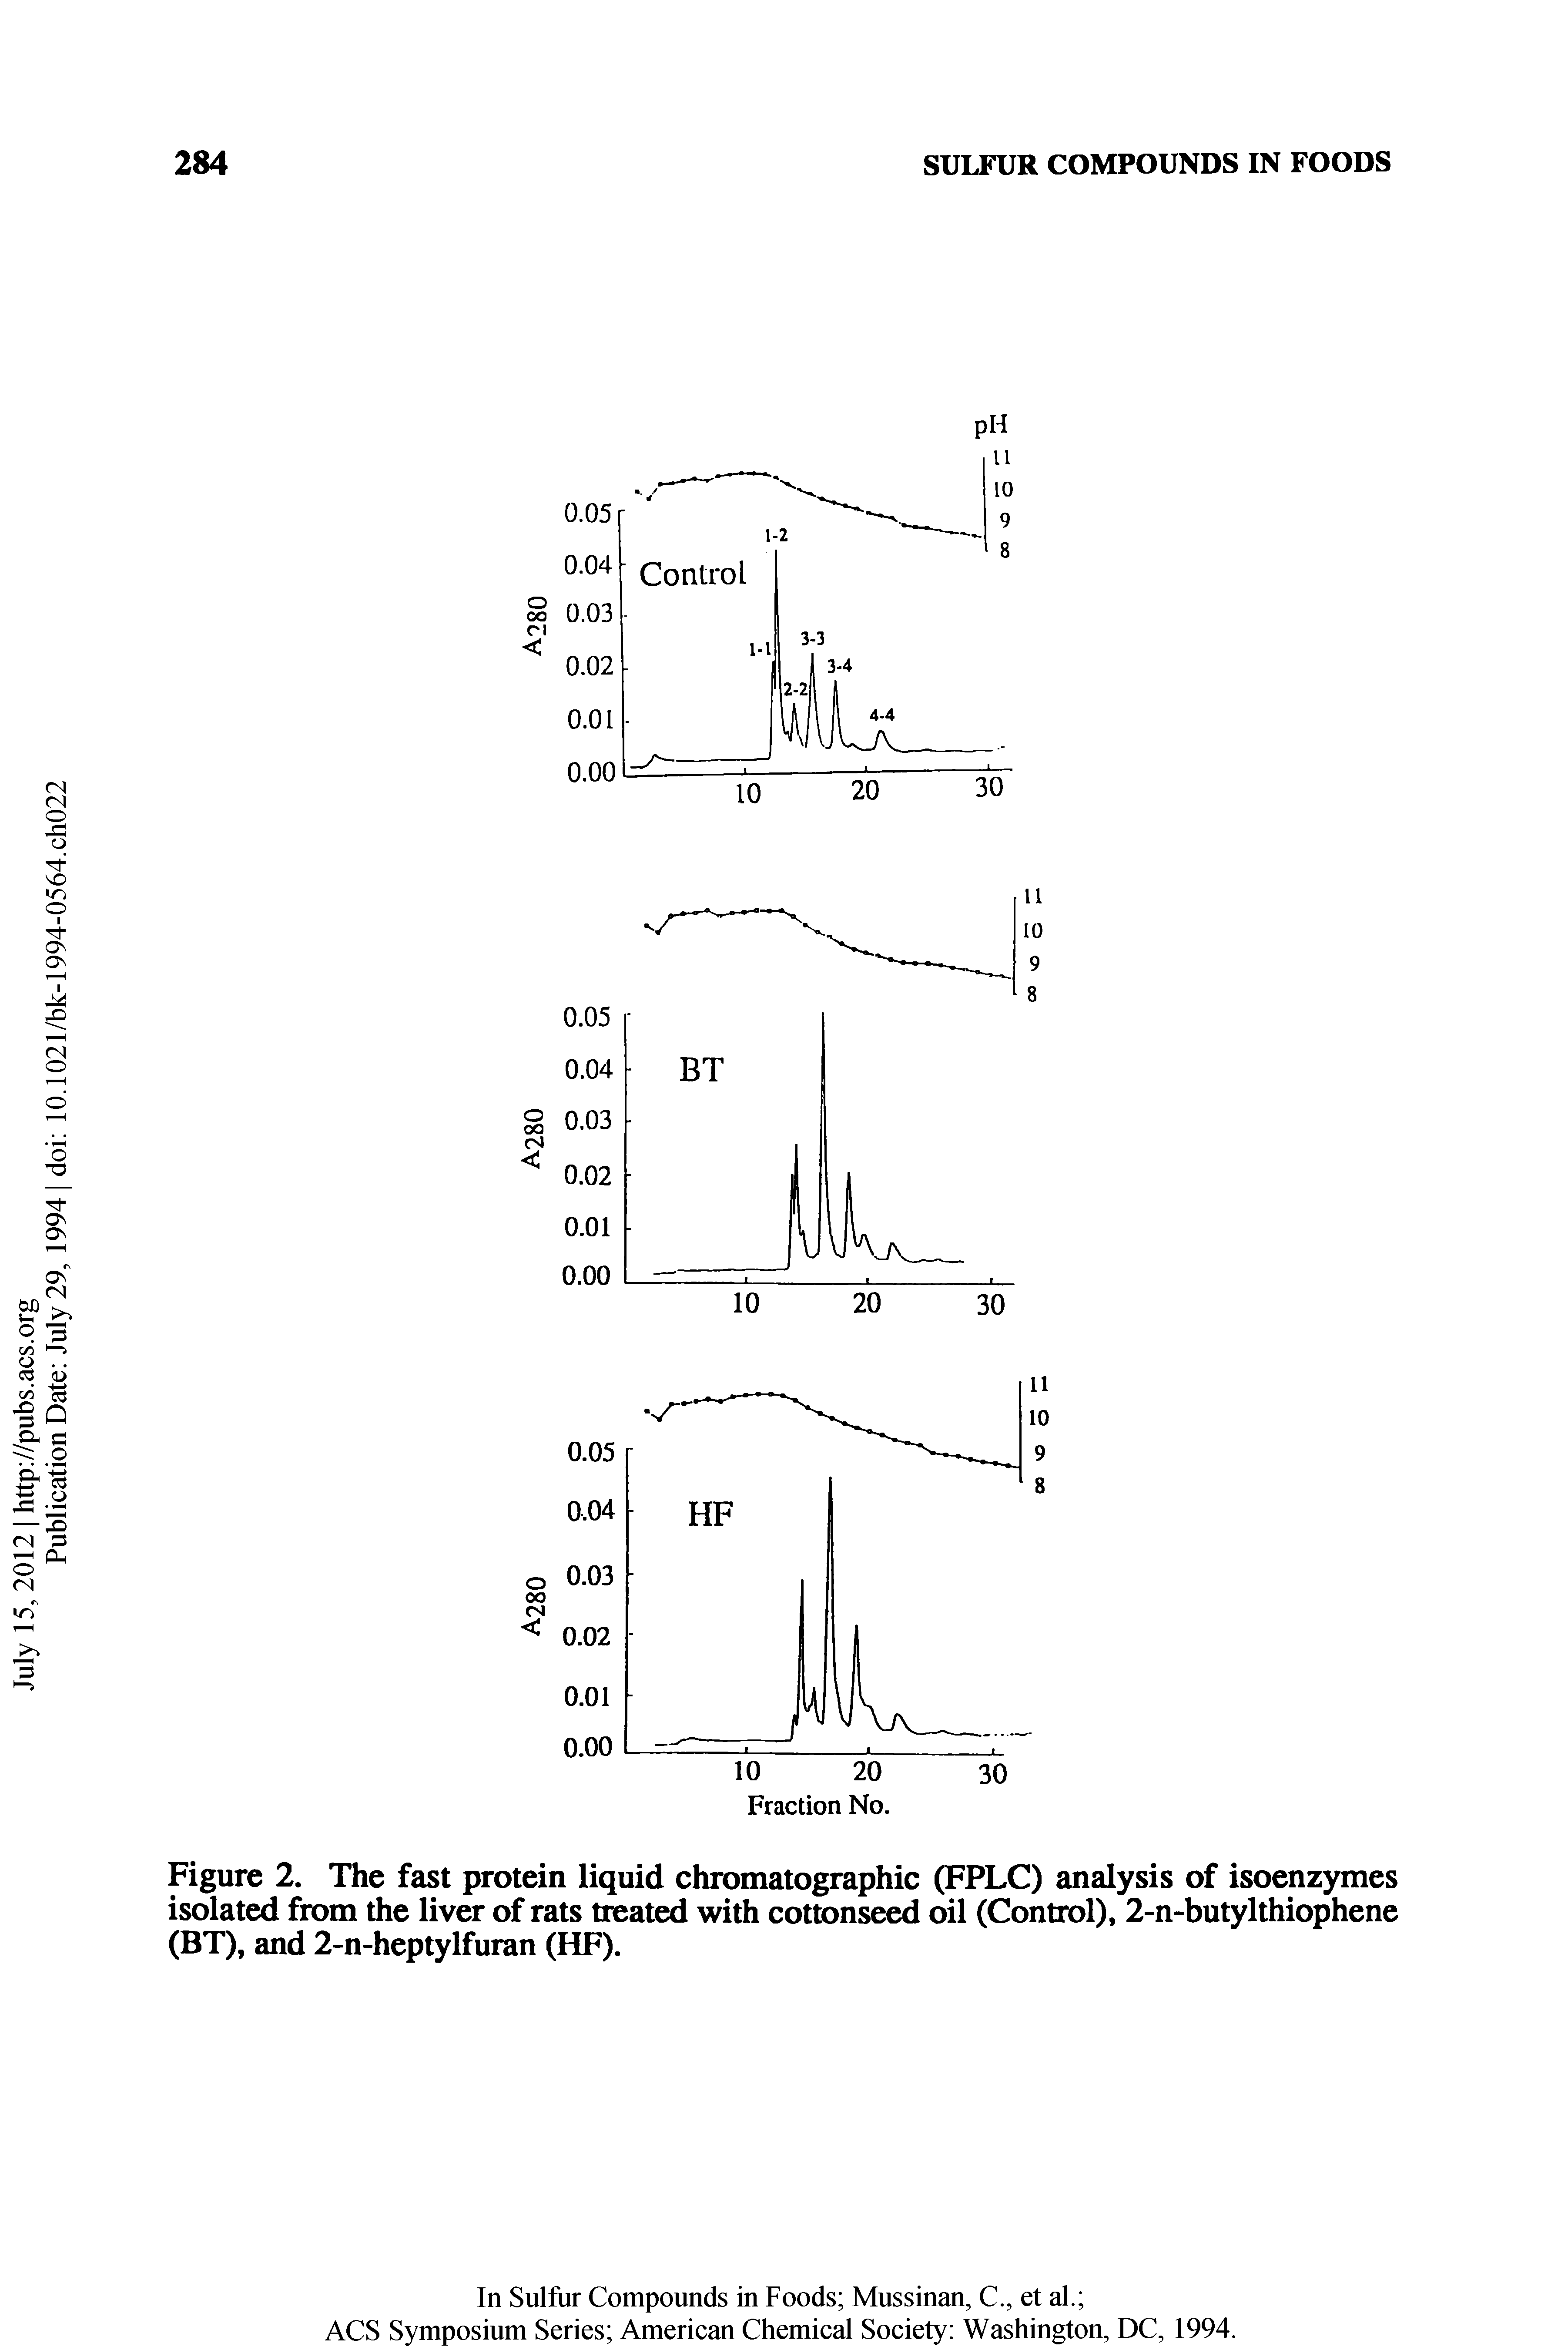 Figure 2. The fast protein liquid chromatographic (FPLC) analysis of isoenzymes isolated from the liver of rats treated with cottonseed oil (Control), 2-n-butylthiophene (BT), and 2-n-heptylfuran (HF).